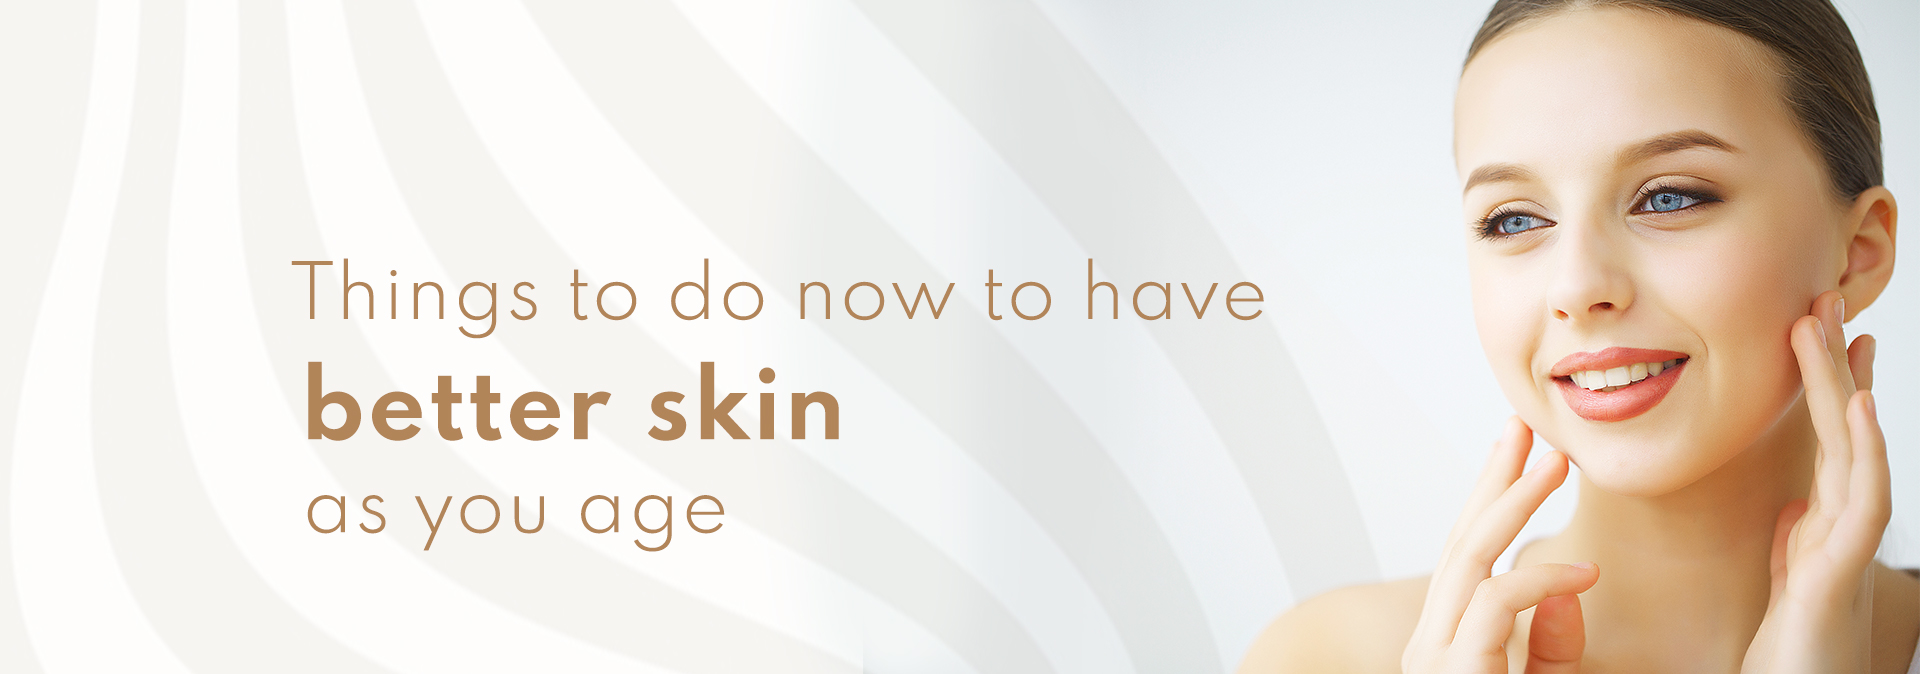 Things to do now to have better skin as you age